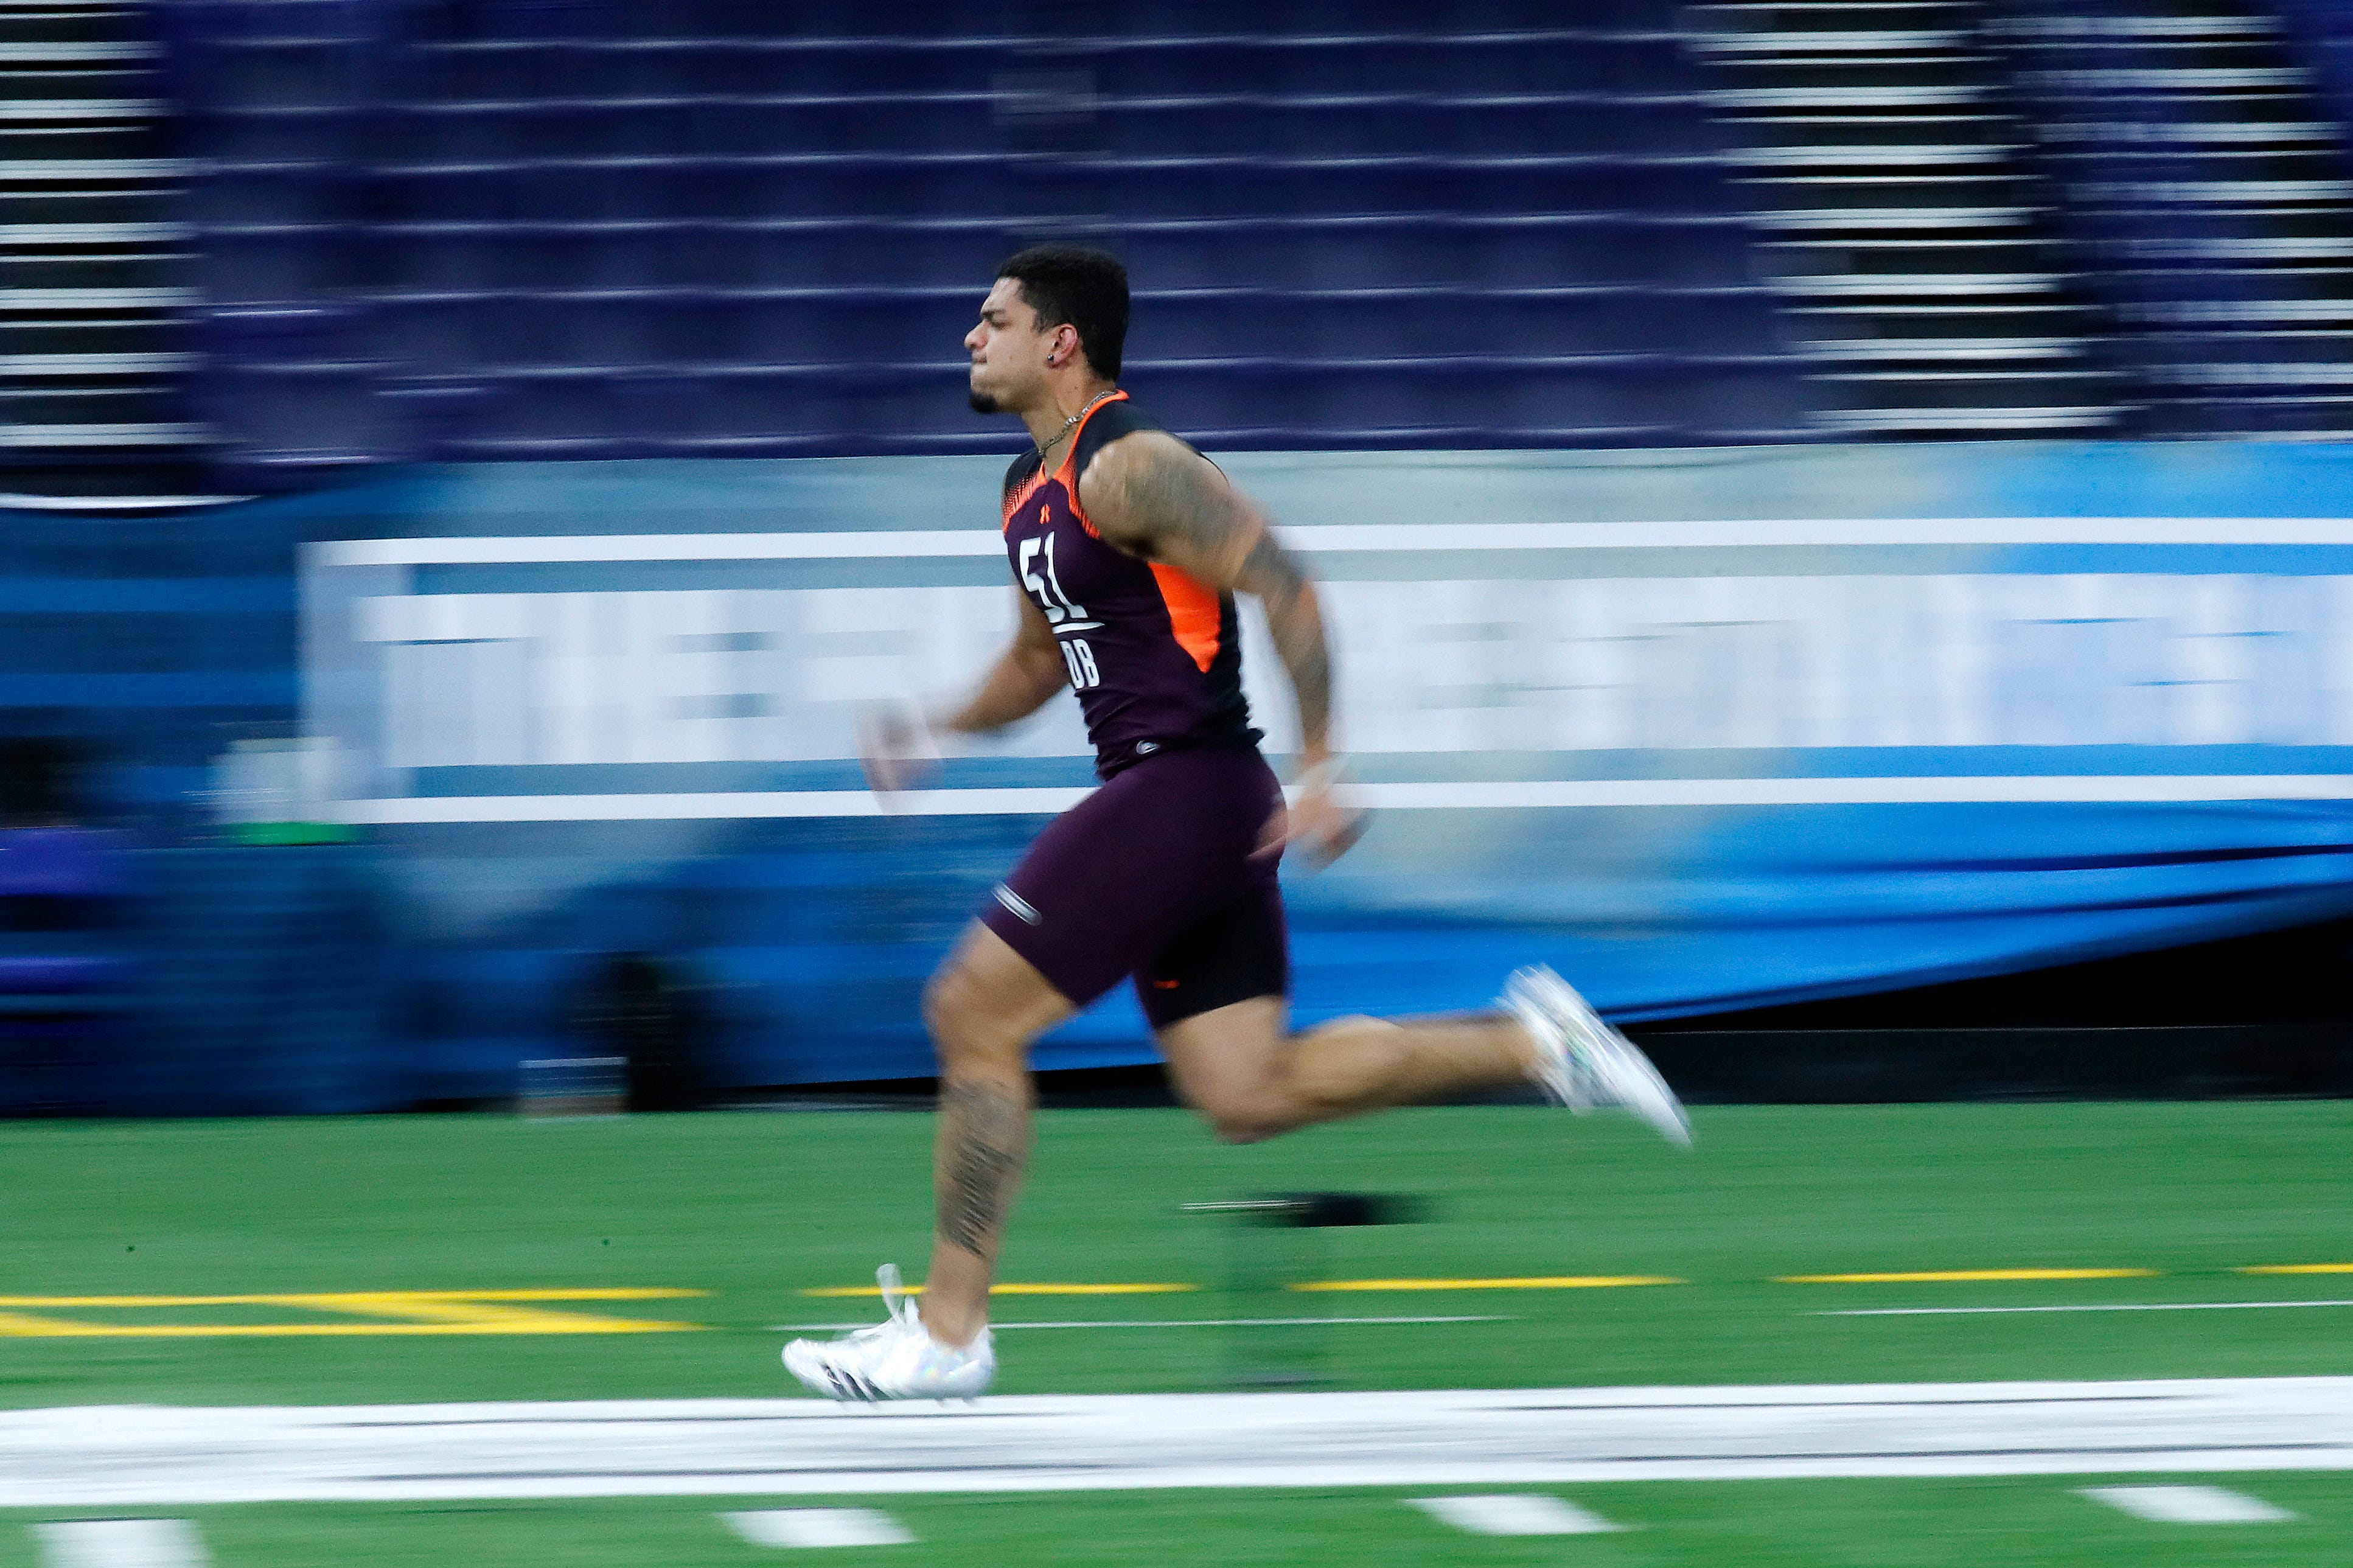 Iowa defensive back Amani Hooker runs the 40 yard dash during the 2019 NFL Combine at Lucas Oil Stadium.